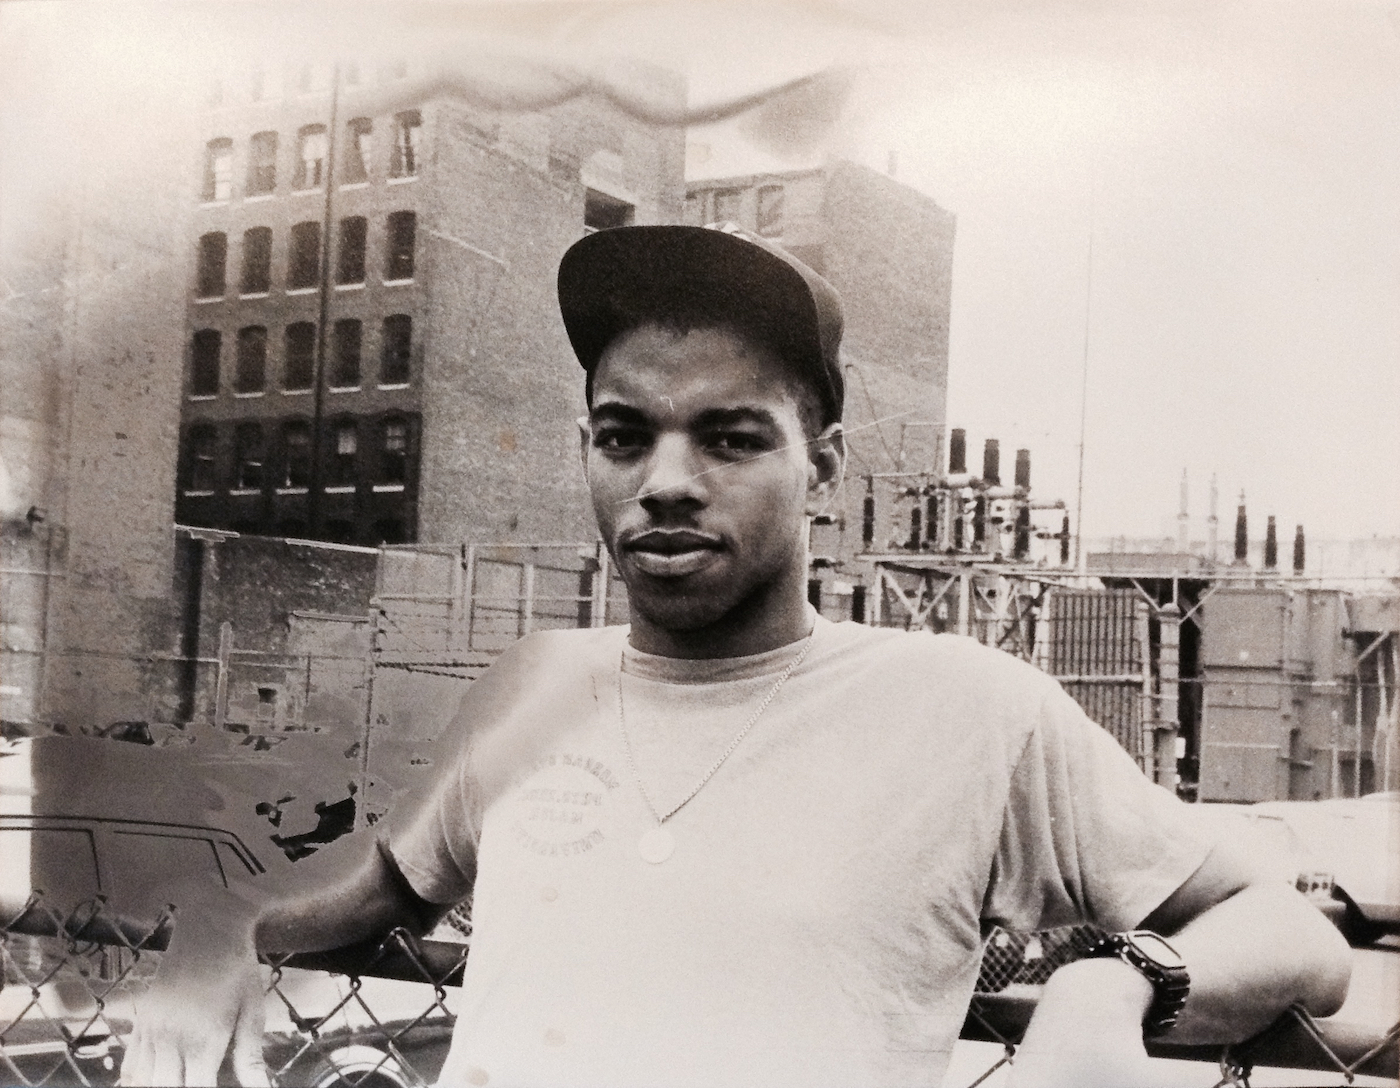 Tzigane West, who was part of the Art Center photography club, stands for his portrait in the mid-1980’s